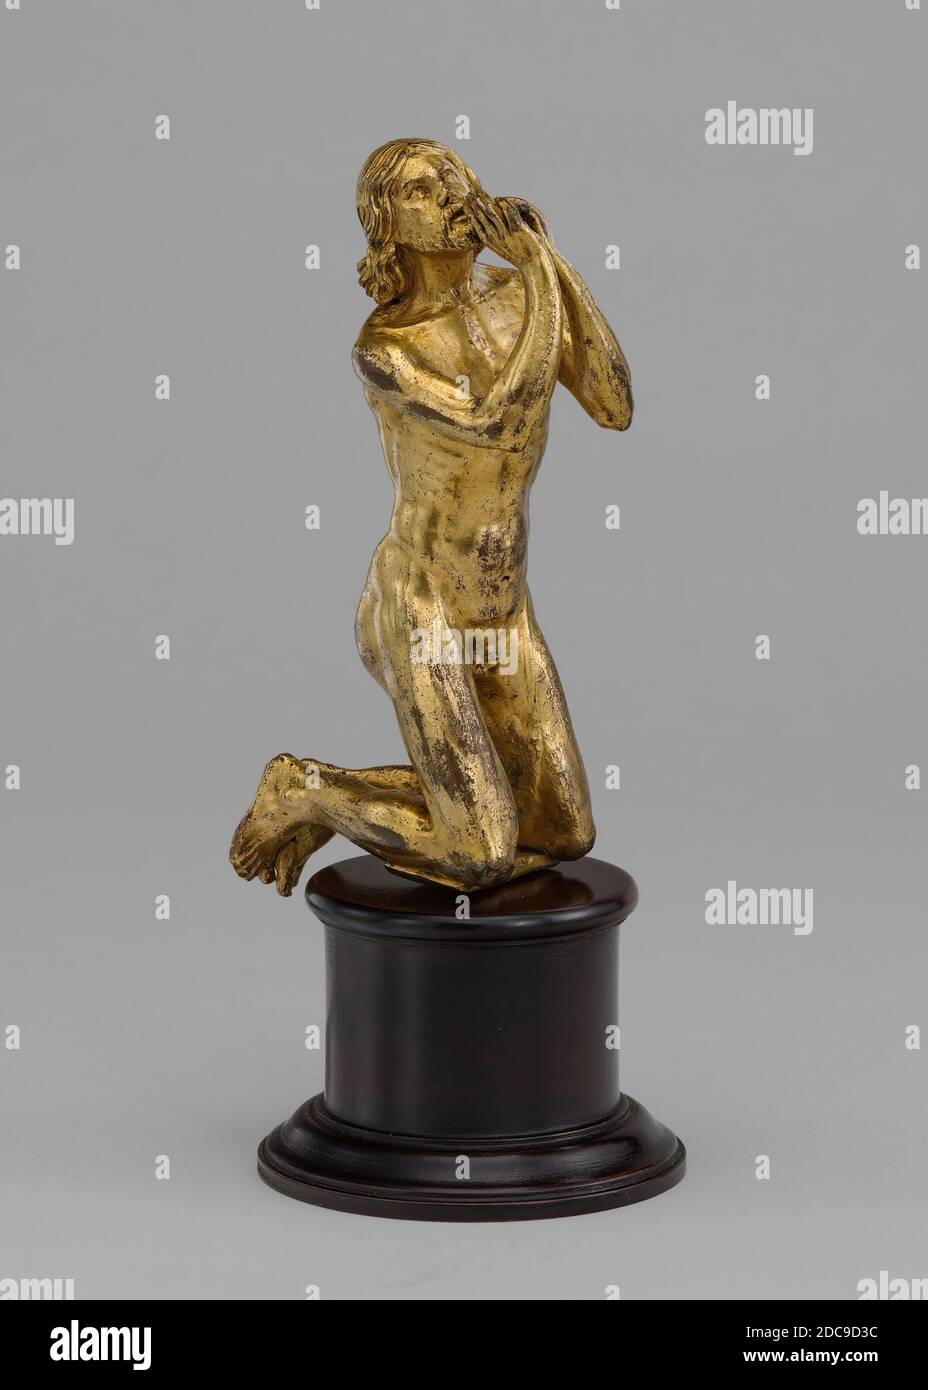 Spanish 16th Century, (sculptor), Kneeling Supplicant, 16th century, gilded bronze, overall: 9.8 x 3.2 x 4 cm (3 7/8 x 1 1/4 x 1 9/16 in Stock Photo